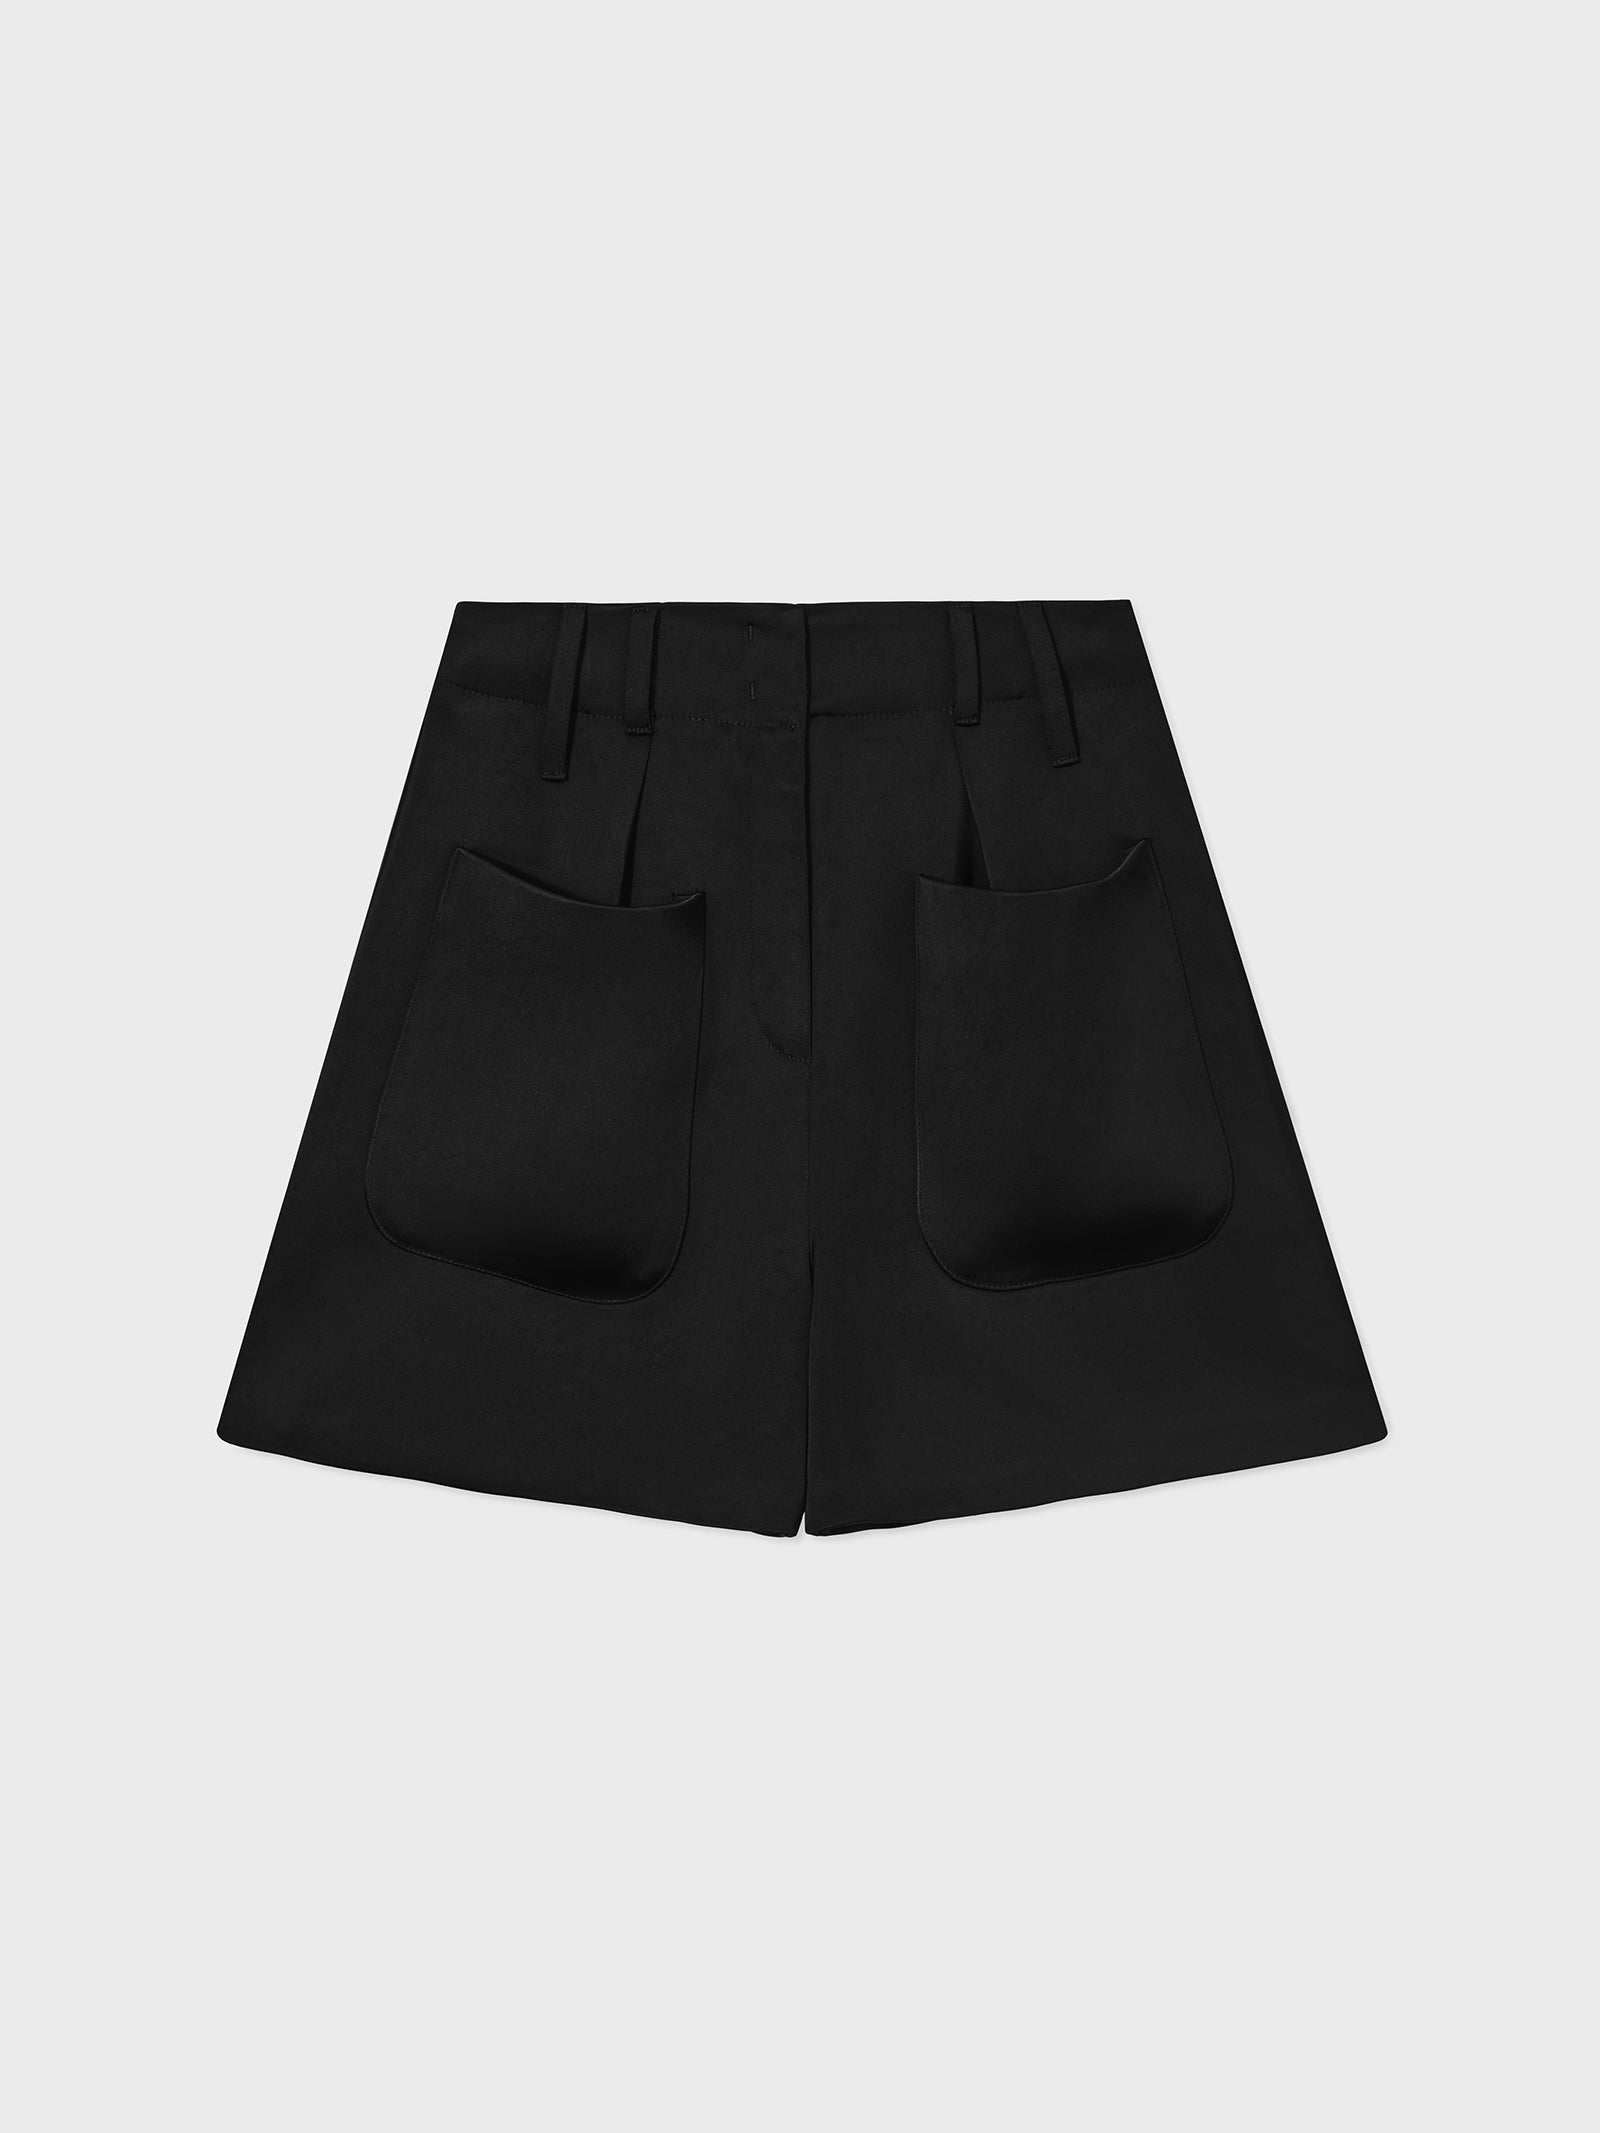 Sack Short in Satin Crepe - Black - CO Collections